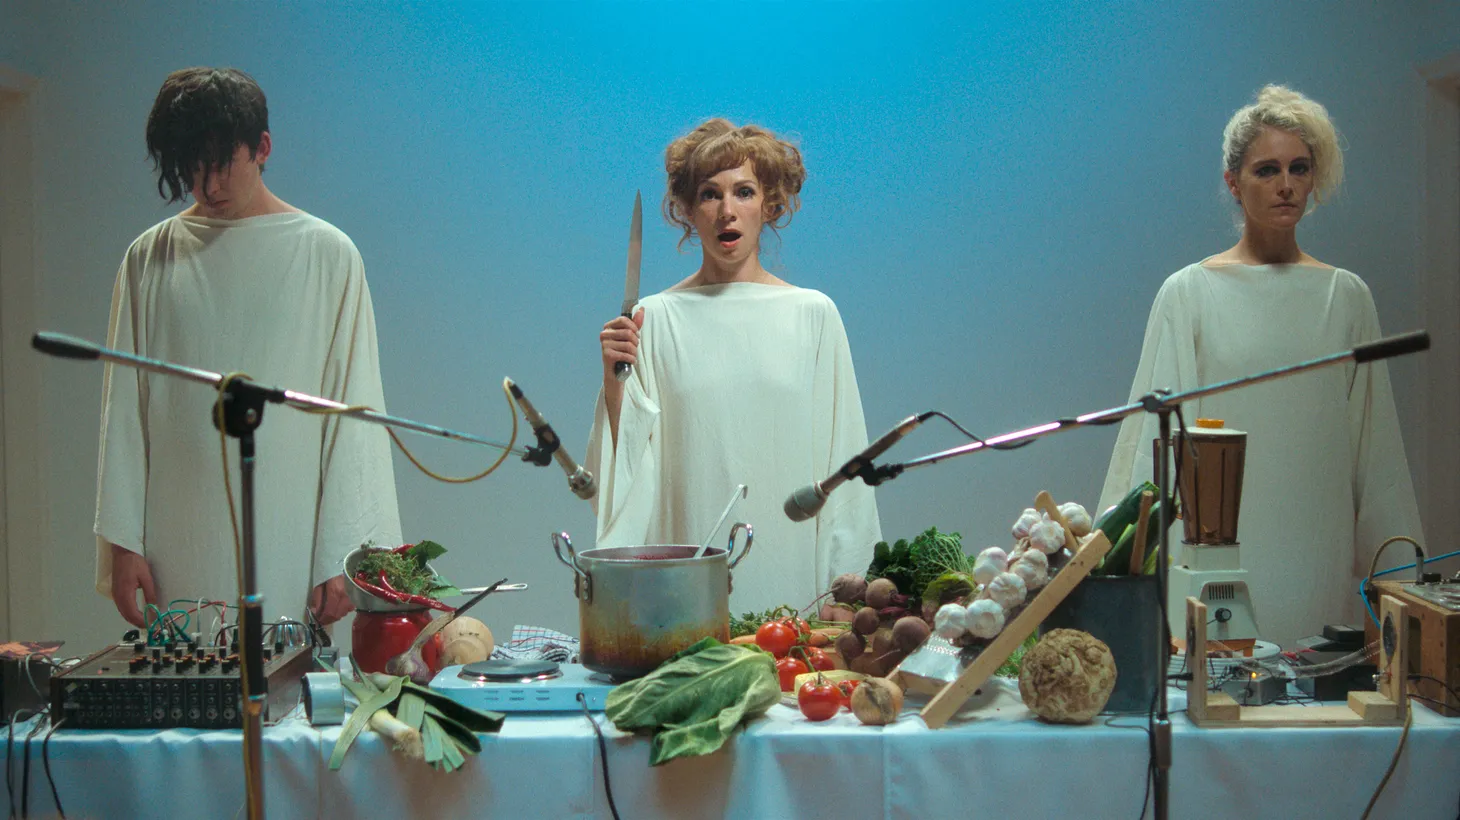 The sonic kitchen band is a recipe for satirical horror in Peter Strickland’s “Flux Gourmet.”